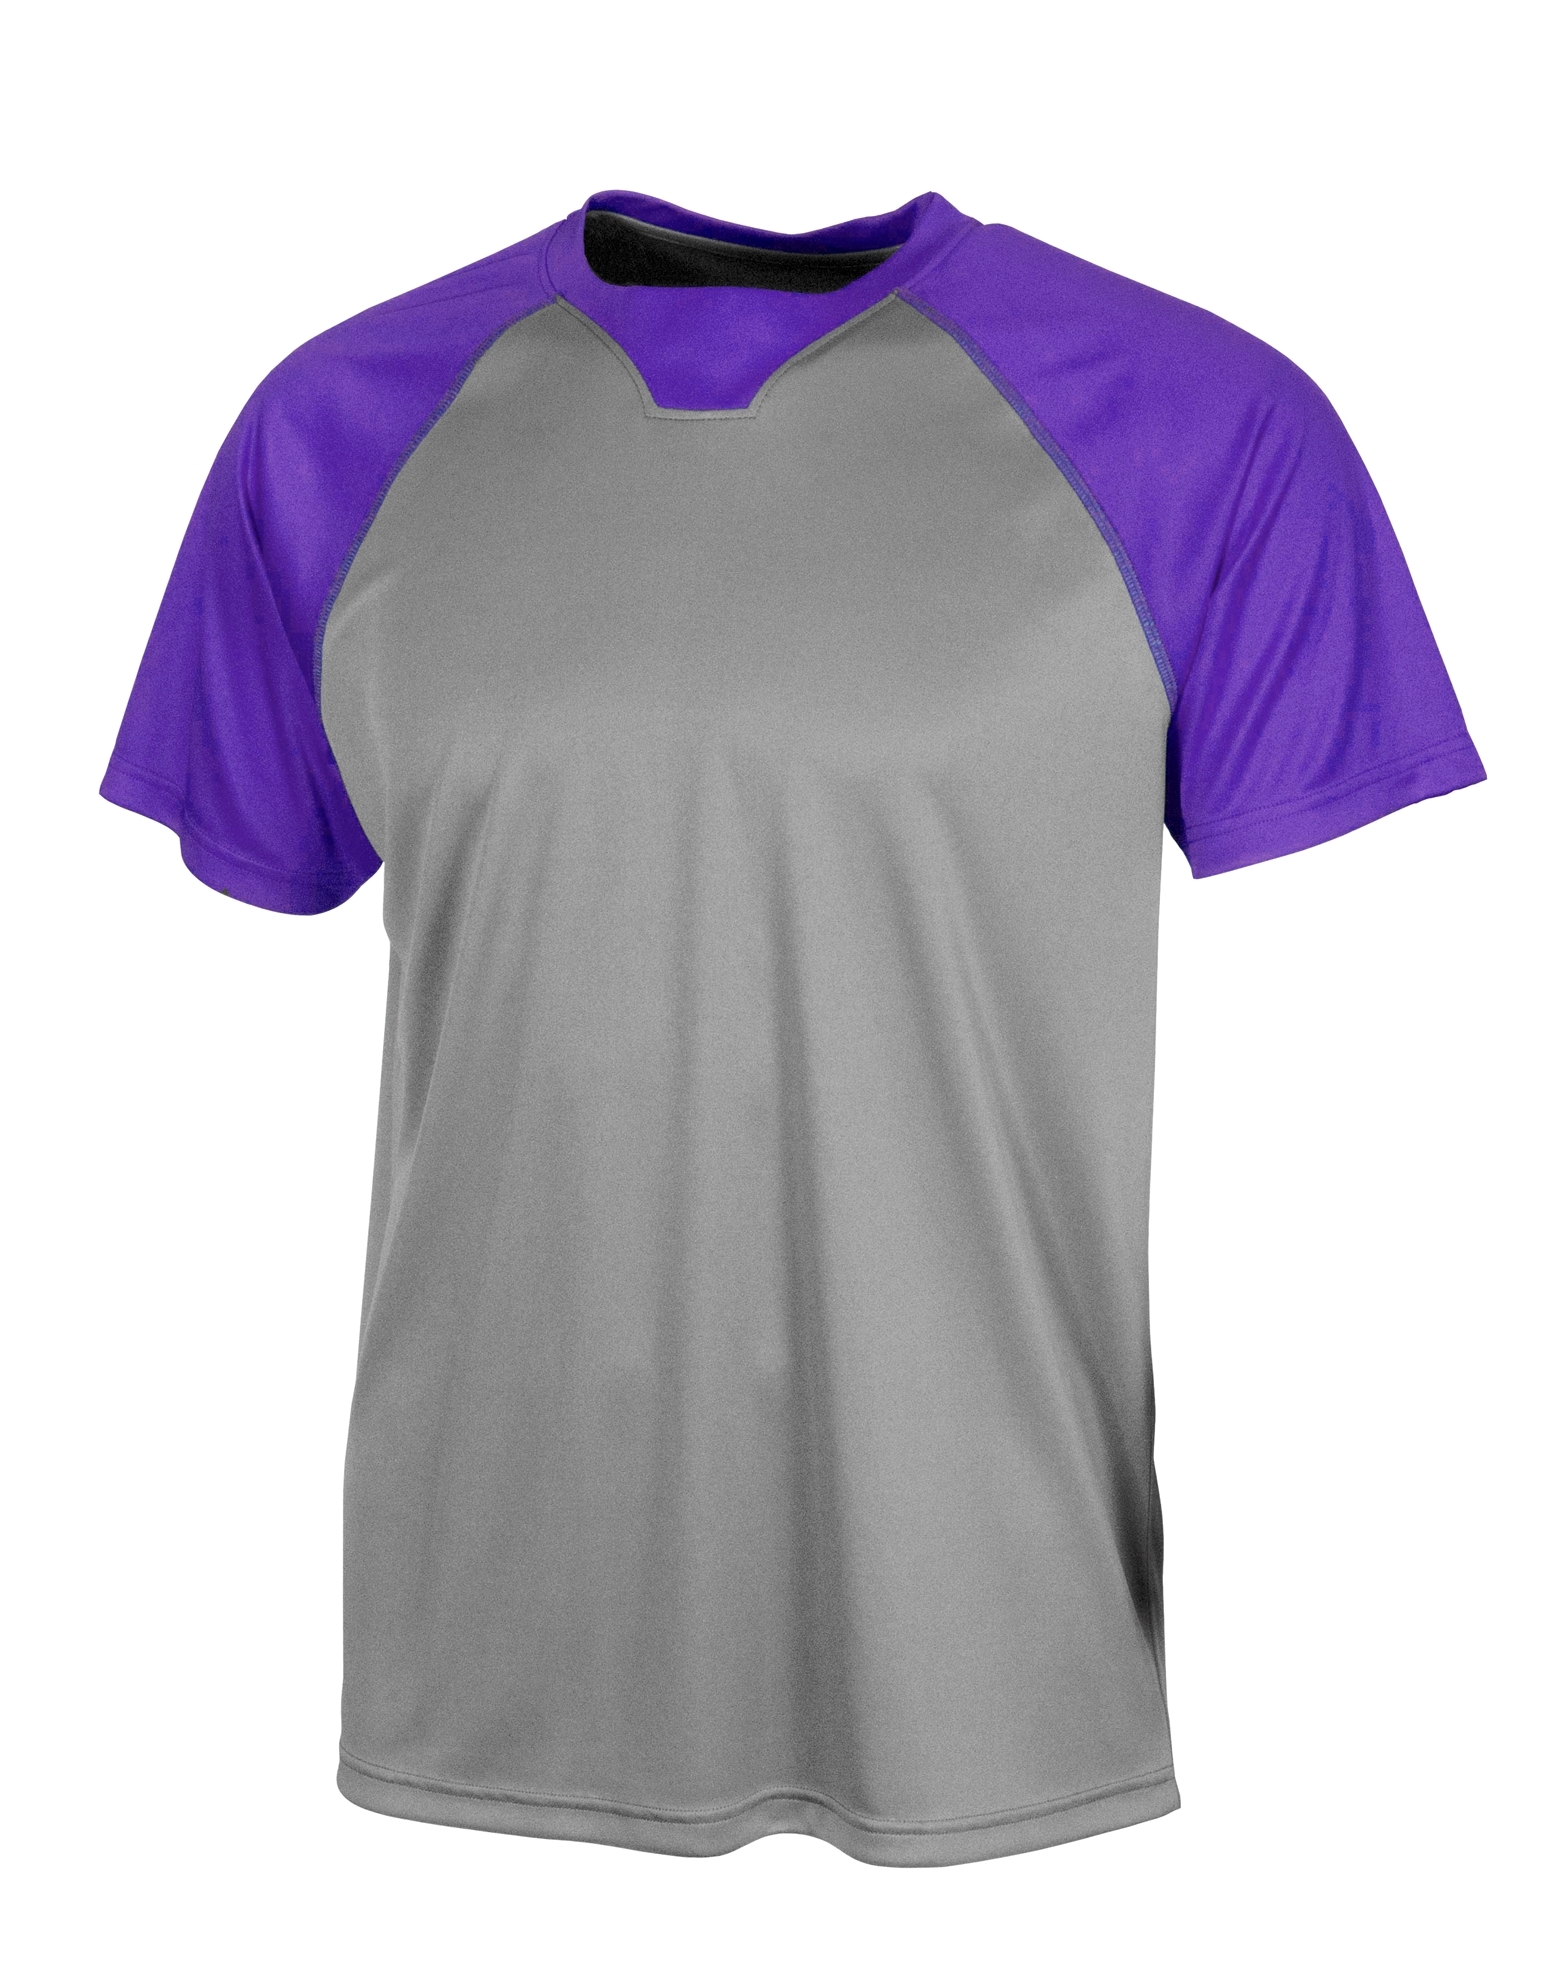 click to view CHARCOAL/PURPLE